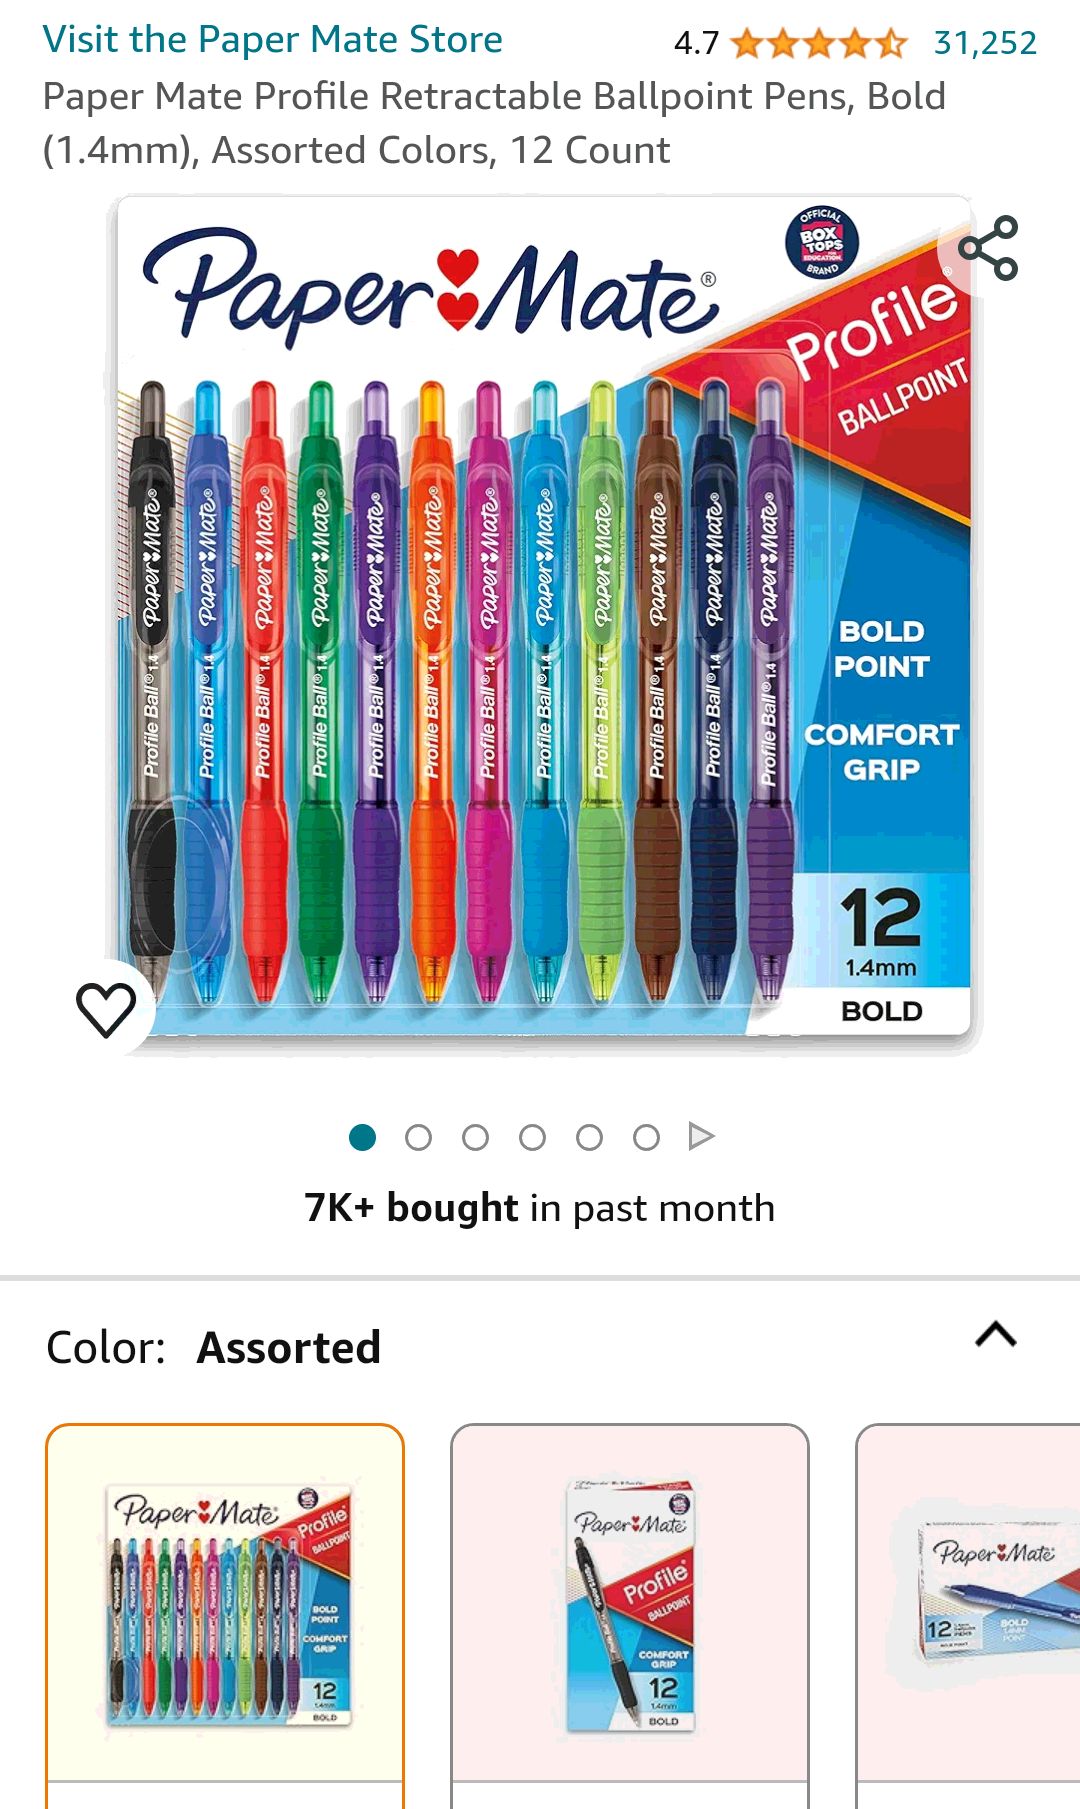 Amazon.com : Paper Mate Profile Retractable Ballpoint Pens, Bold (1.4mm), Assorted Colors, 12 Count : Ballpoint Stick Pens : Office Products